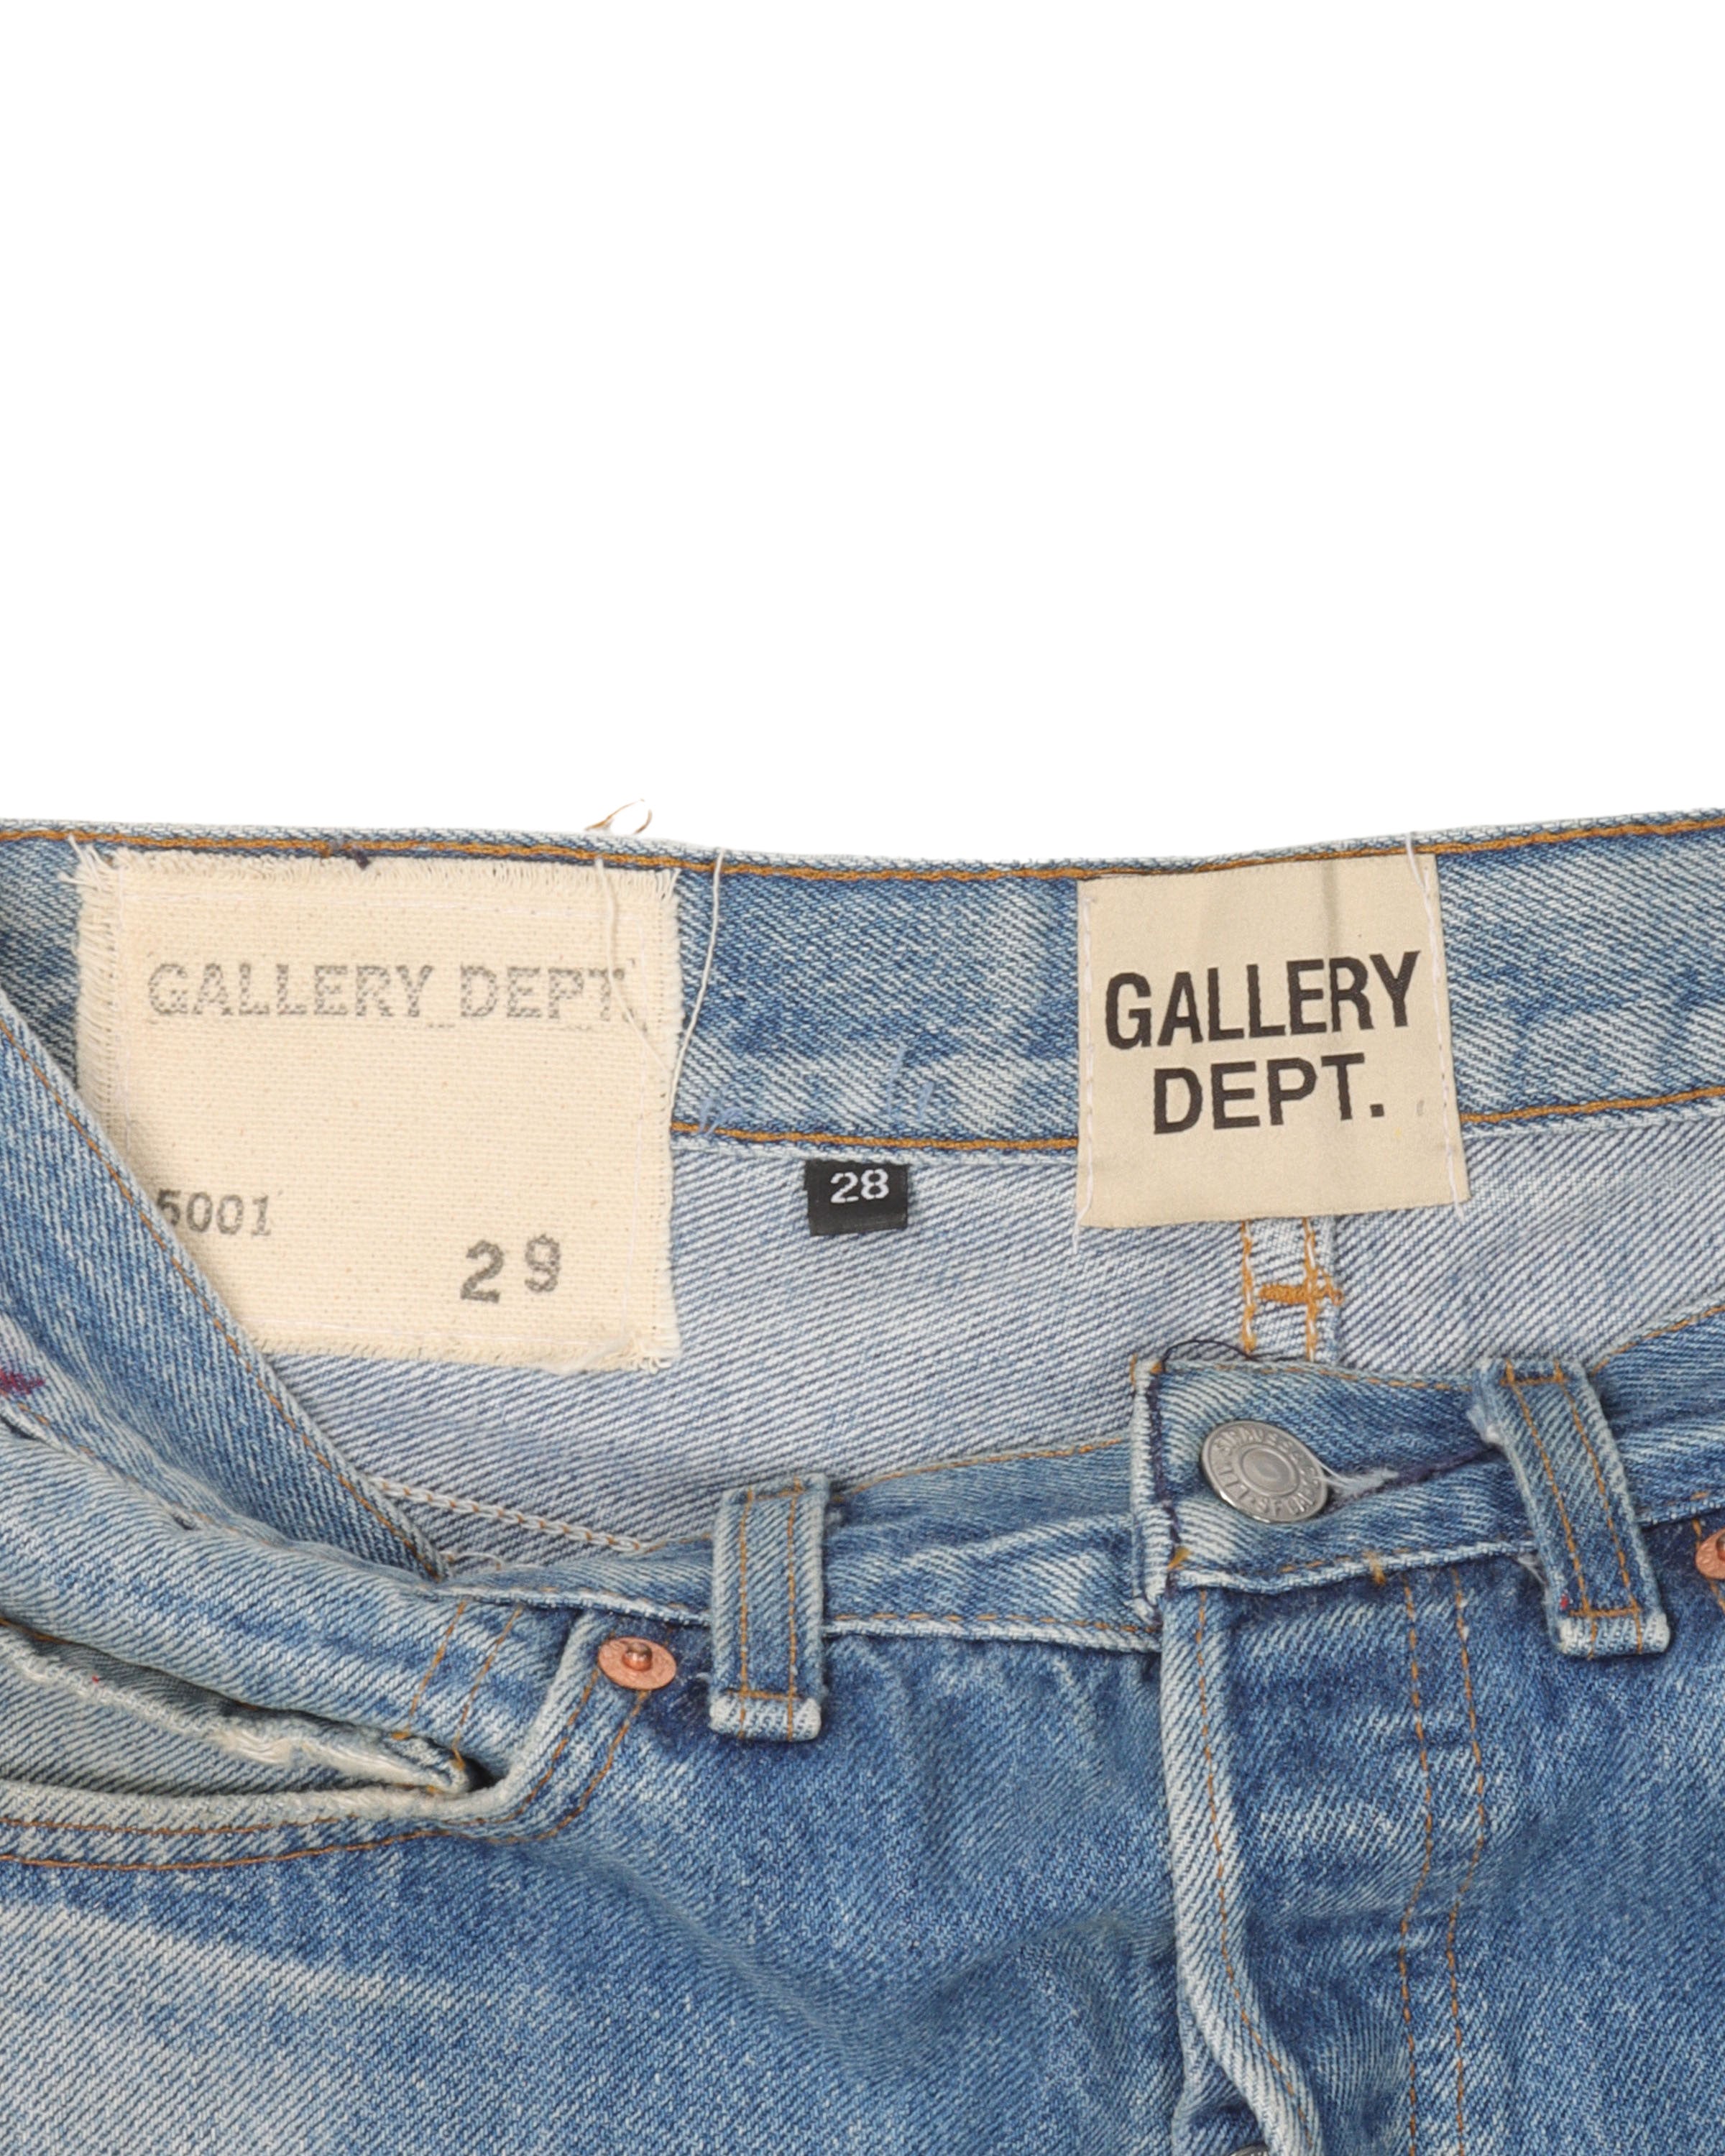 Gallery Dept. Painted 5001 Jeans